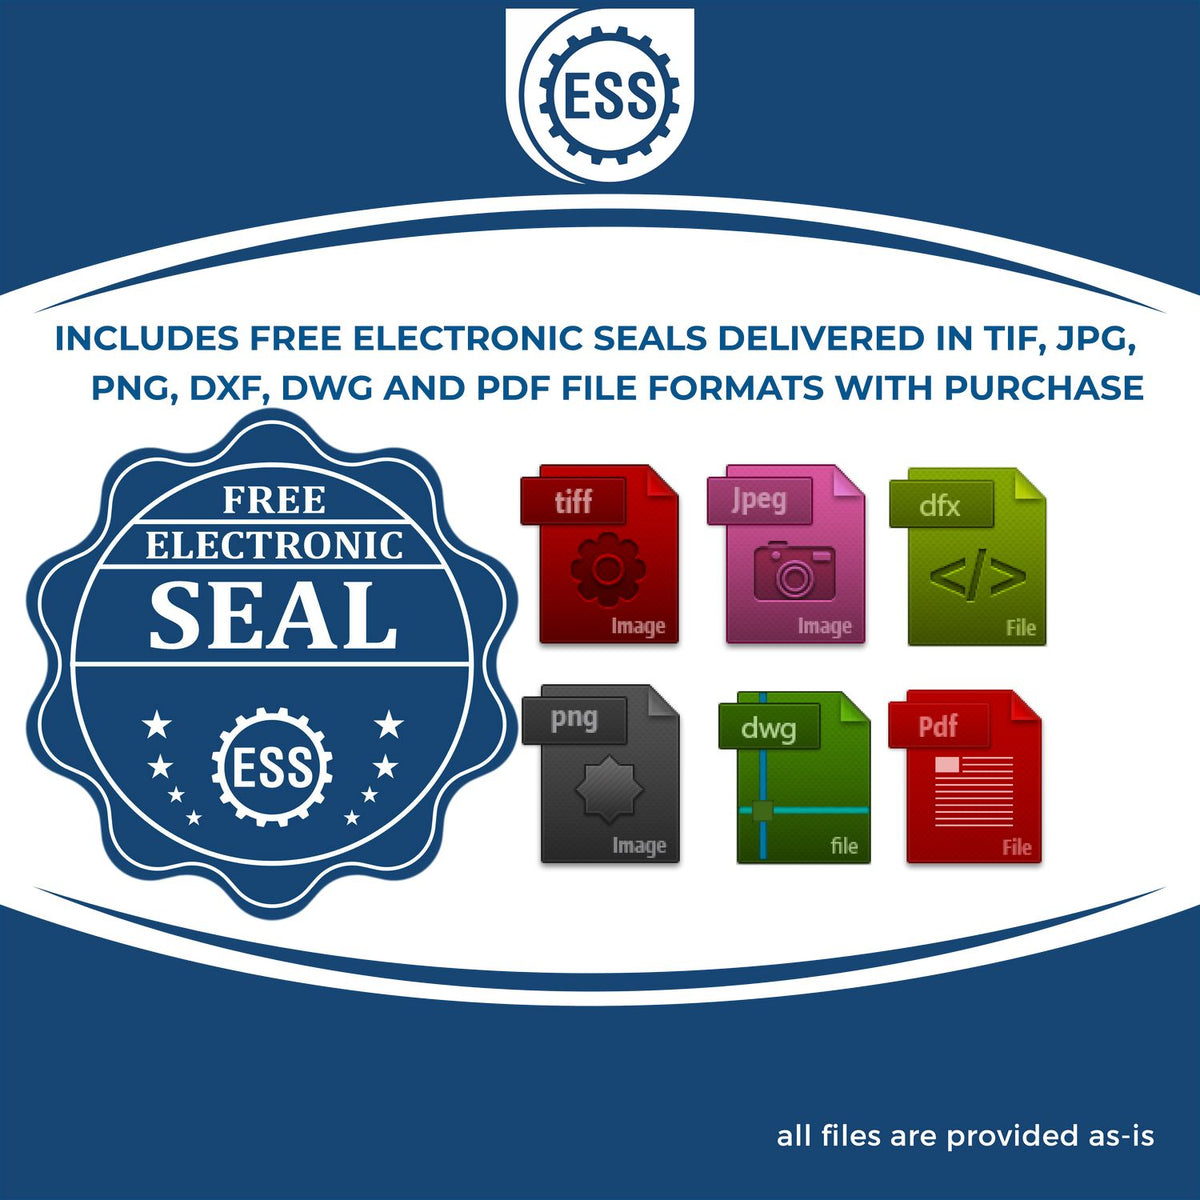 An infographic for the free electronic seal for the Oklahoma Geologist Desk Seal illustrating the different file type icons such as DXF, DWG, TIF, JPG and PNG.